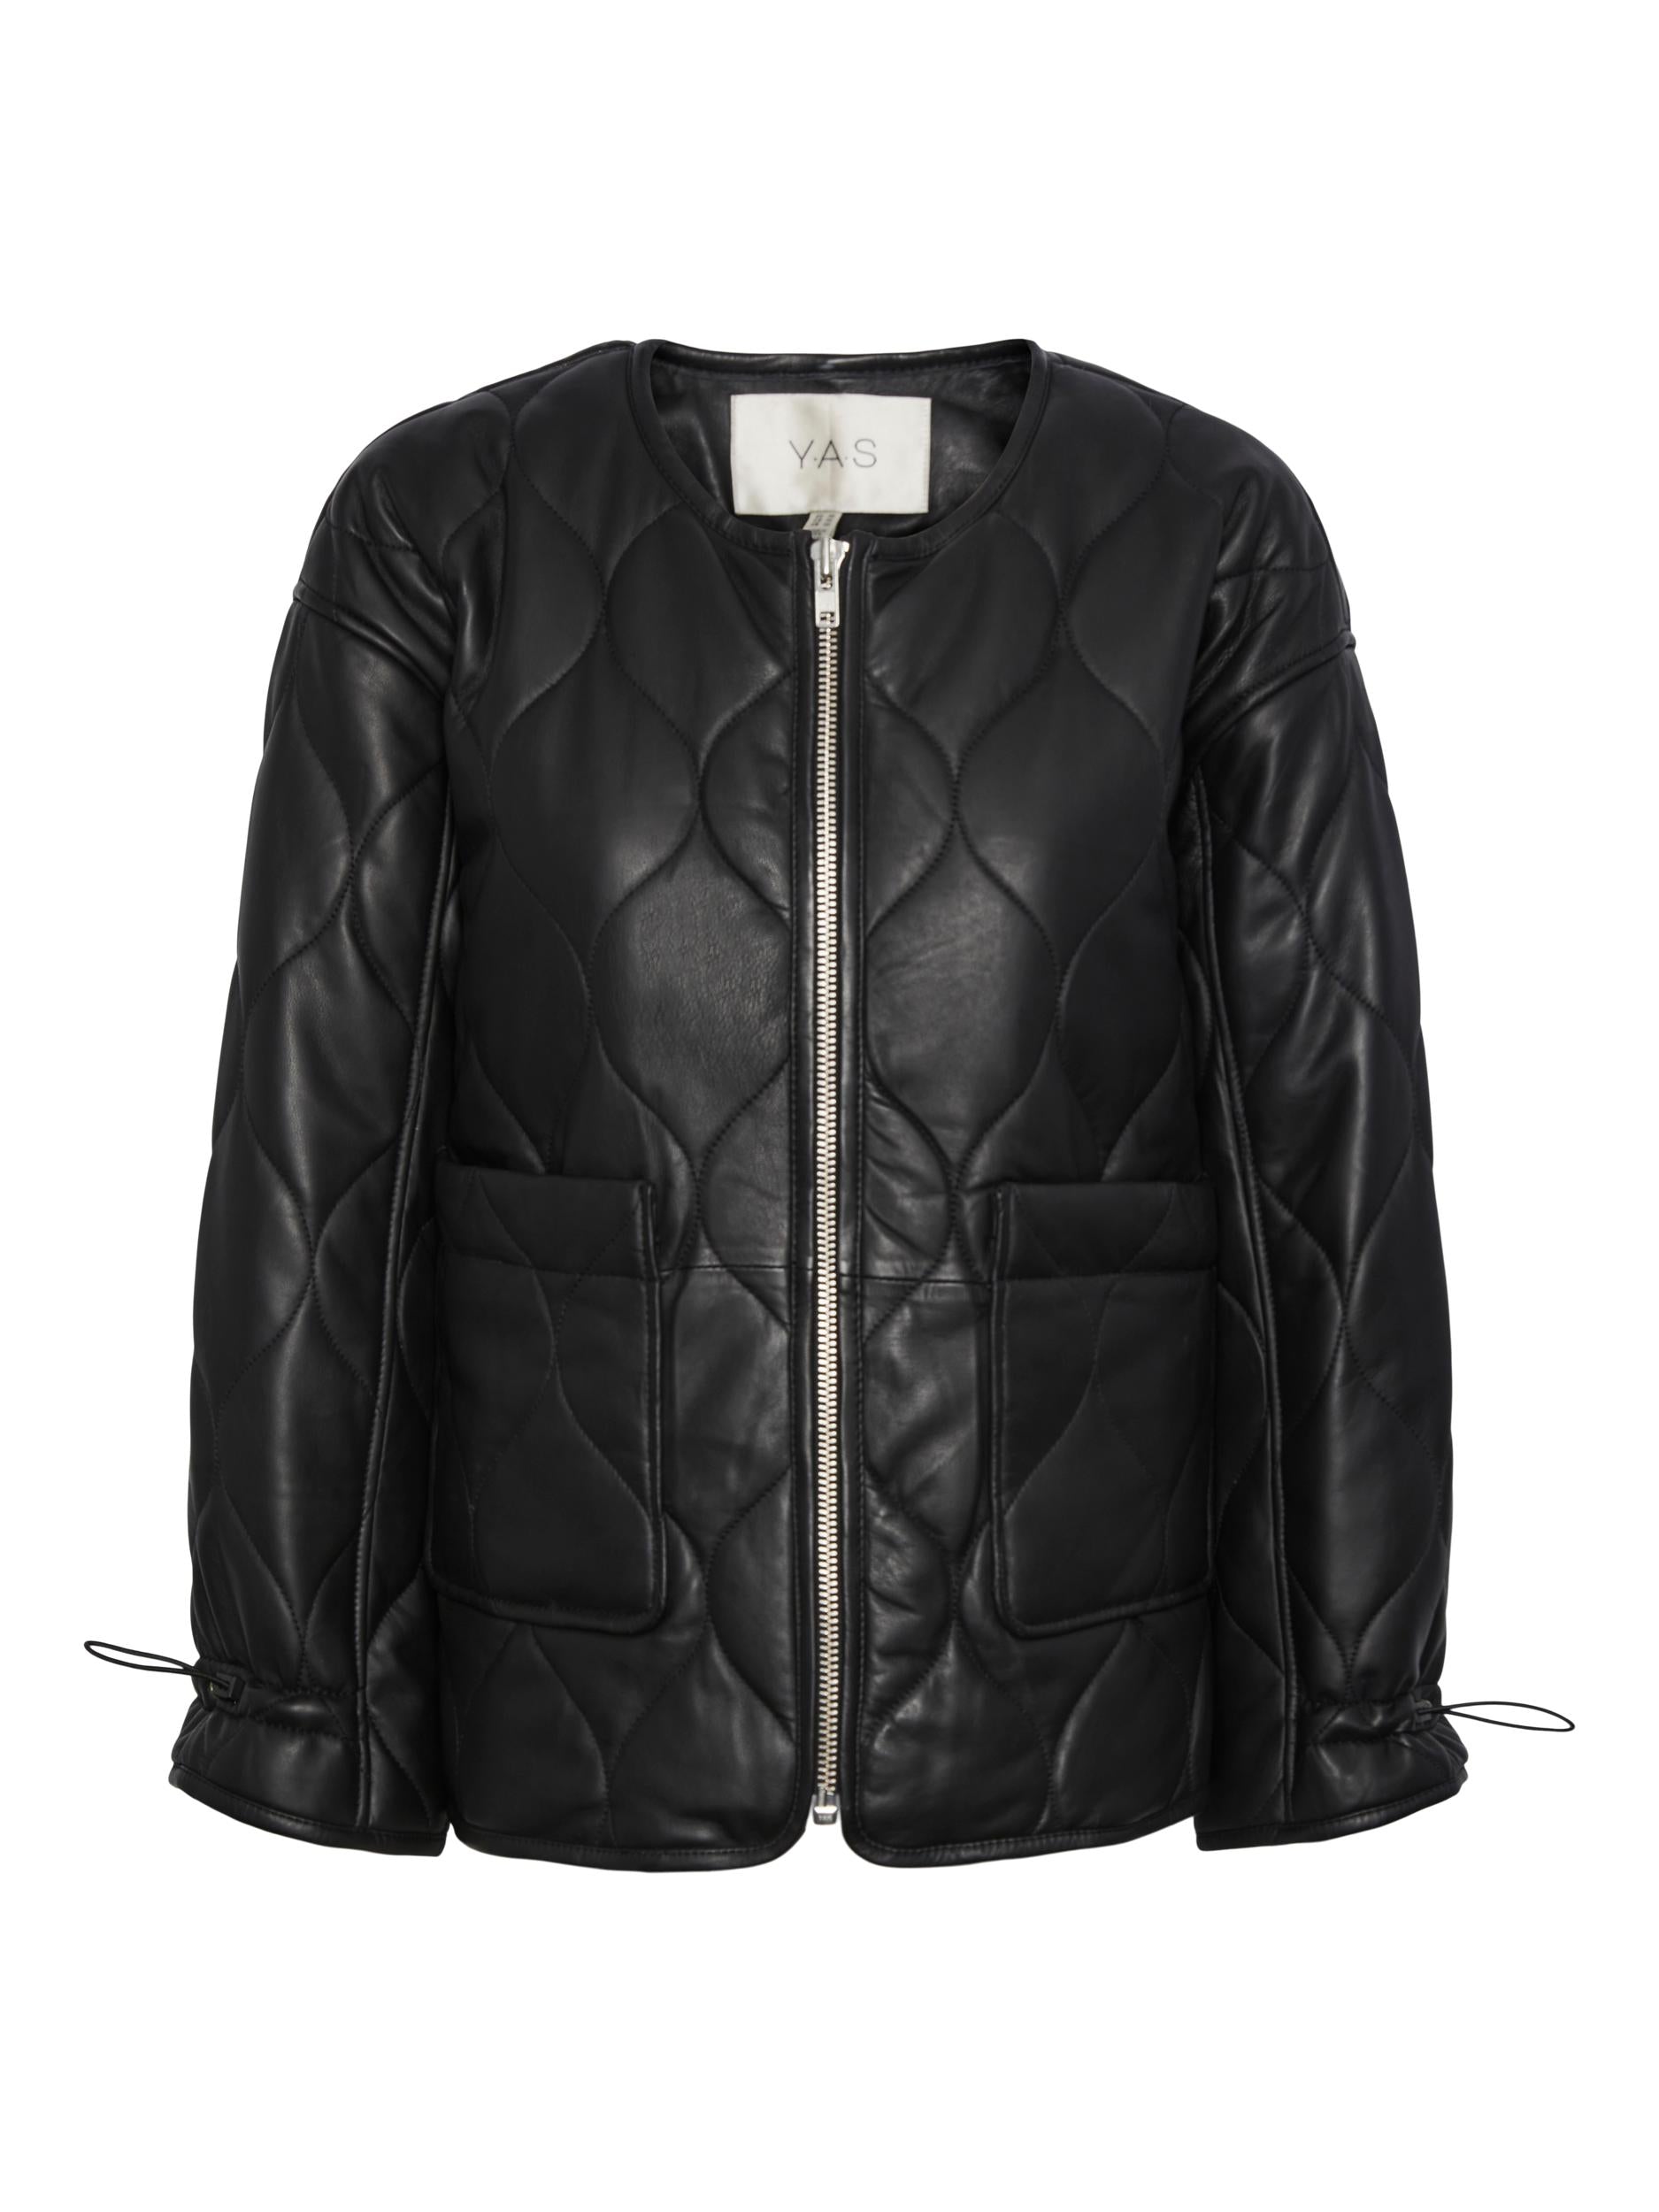 YAS "Noria" Quilted Leather Jacket